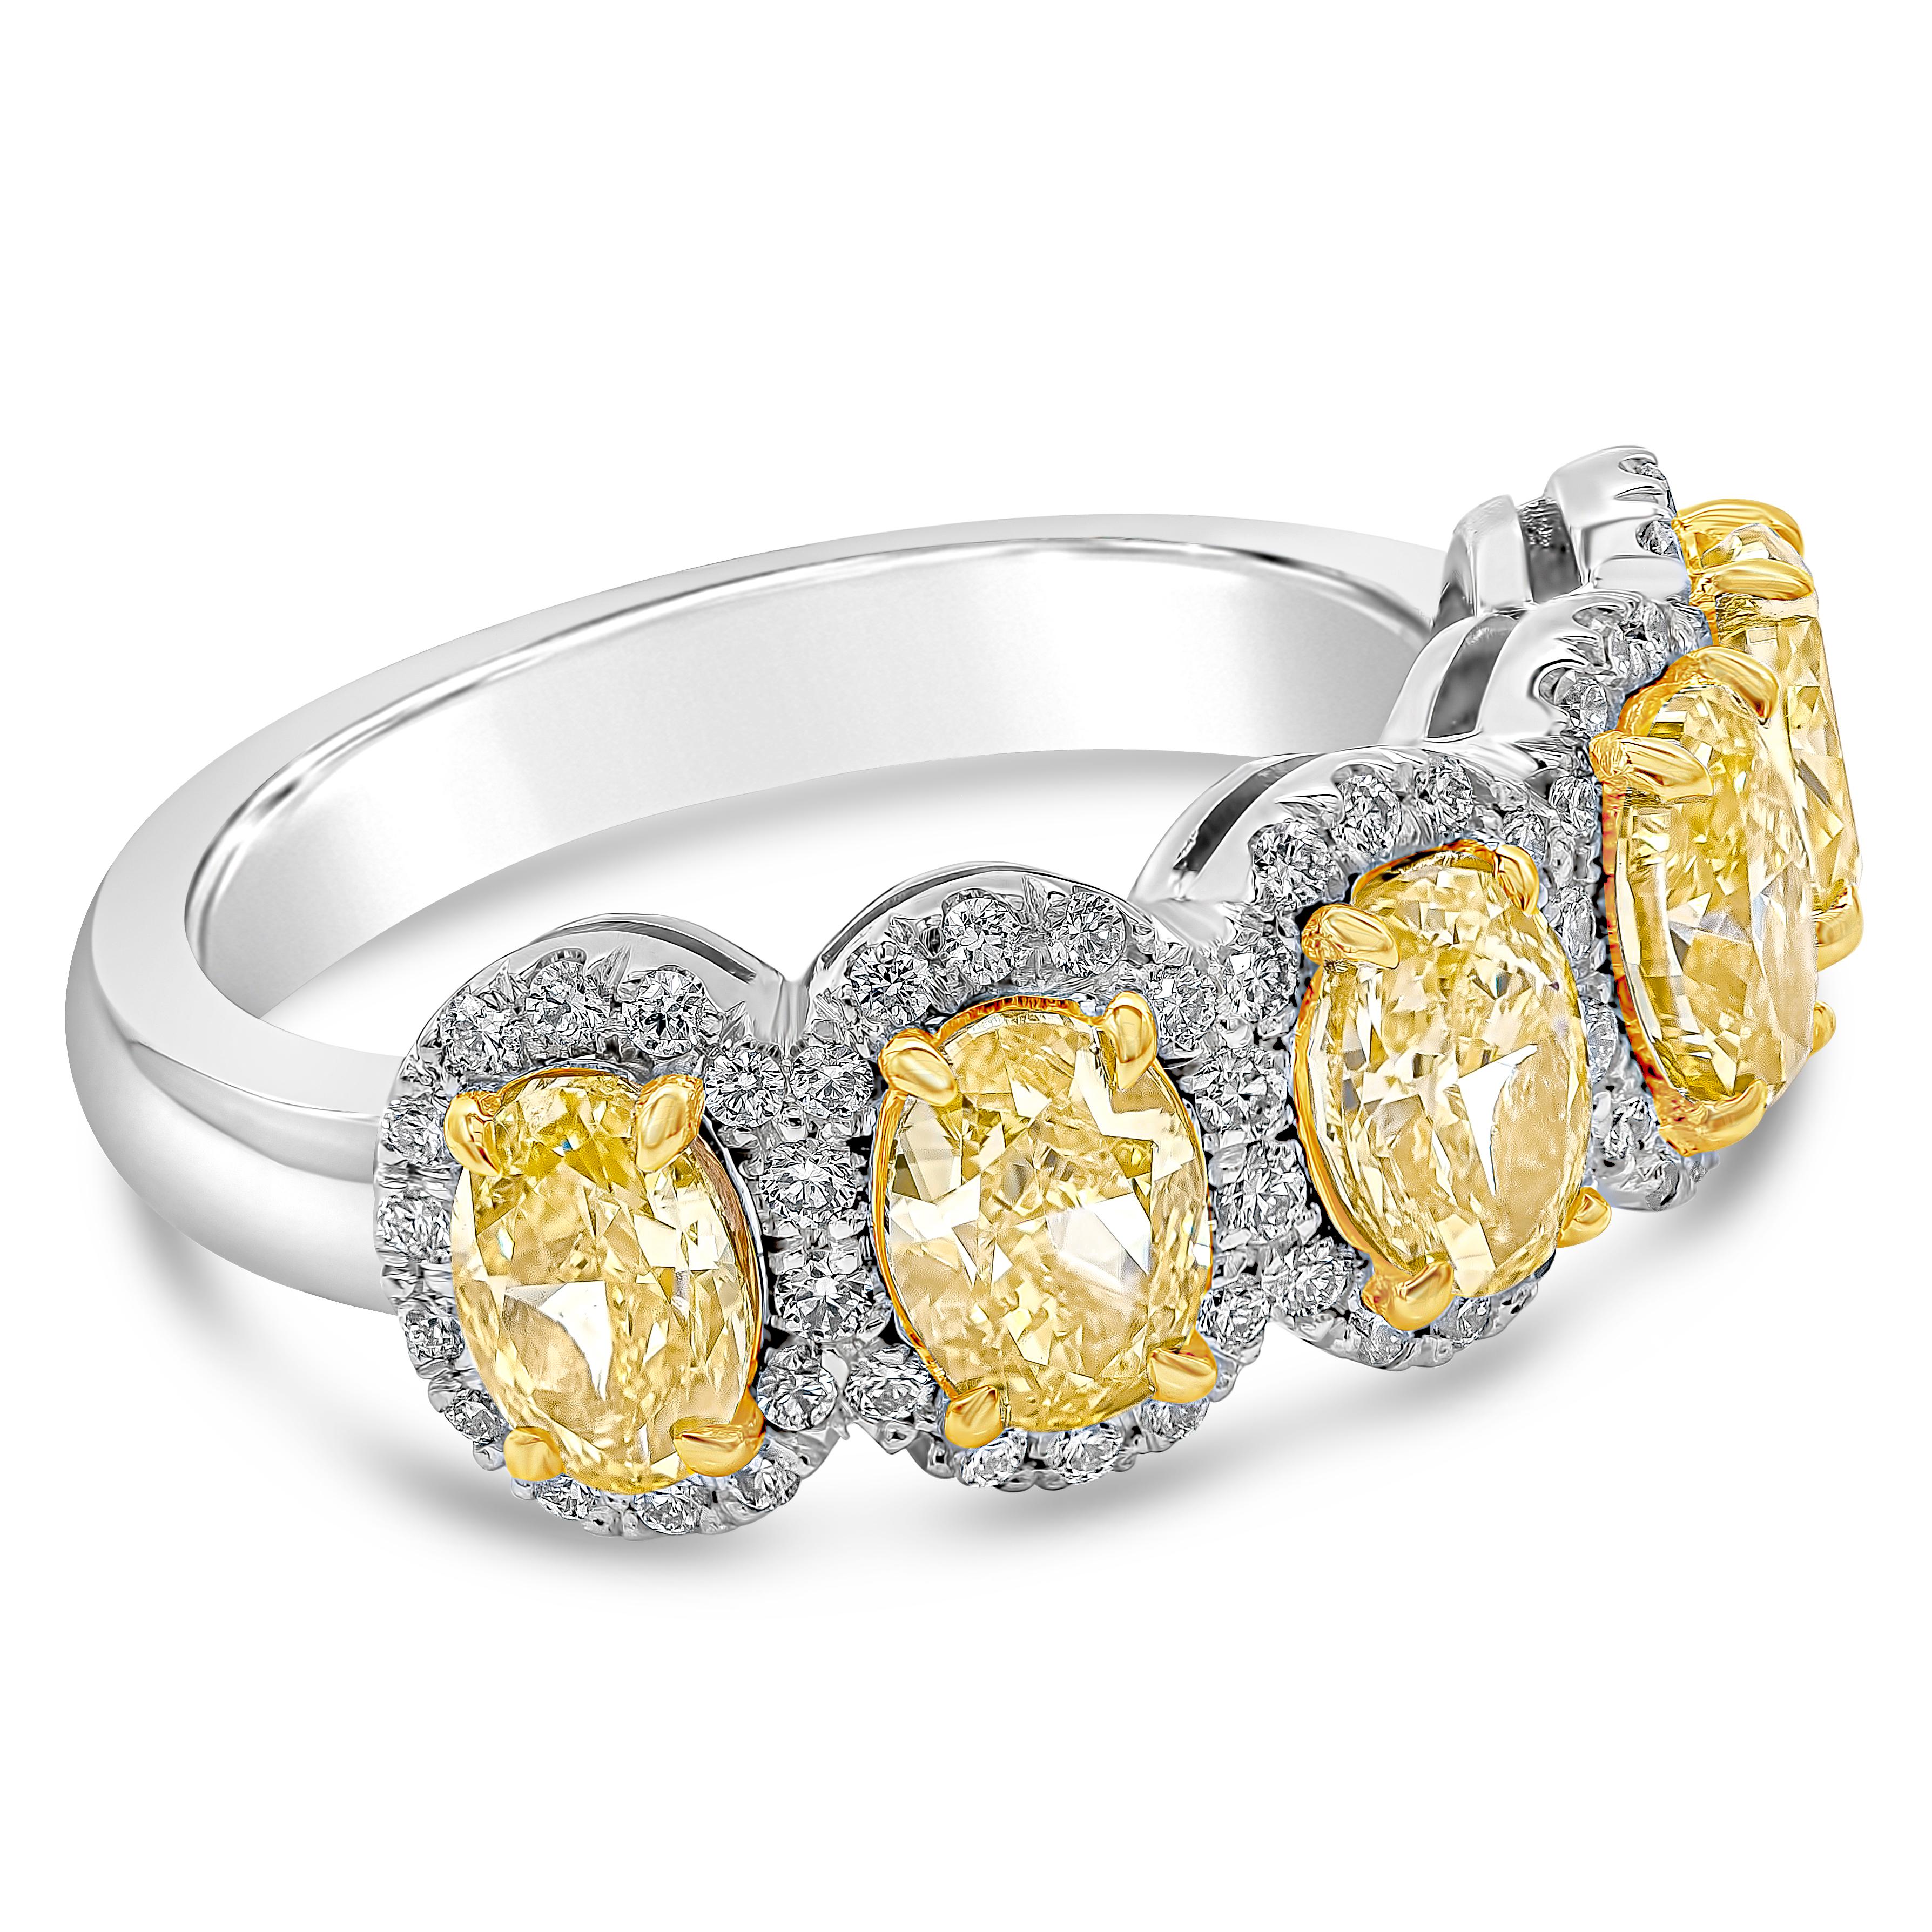 A color-rich ring showcasing vibrant and intense oval cut yellow diamonds, each surrounded by a single row of round brilliant diamonds. Yellow diamonds weigh 2.51 carats total, VS in Clarity. White diamonds weigh 0.25 carats total, F Color and VS in